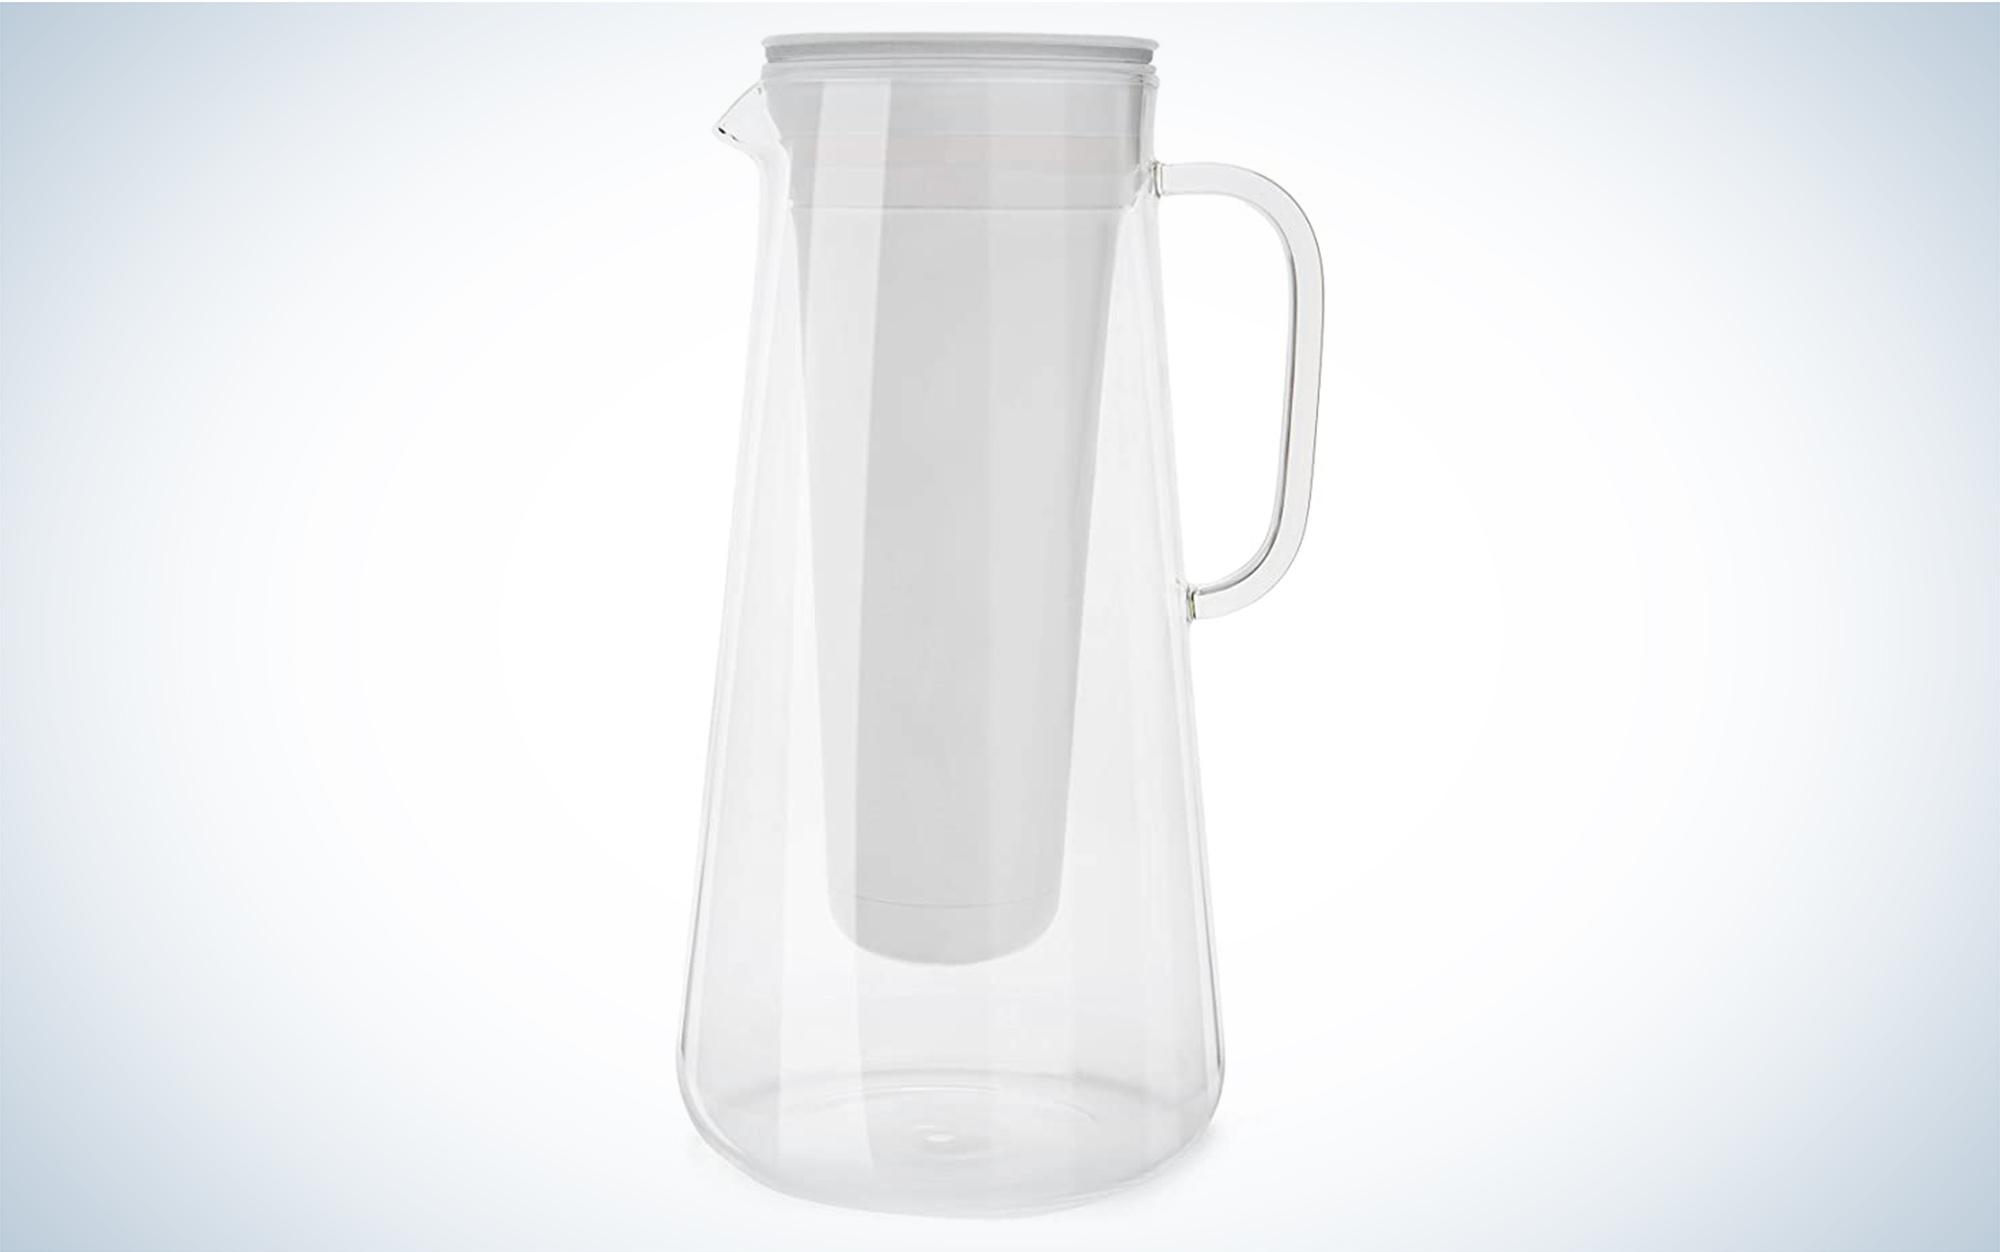 The glass home from LifeStraw improves the taste of tap water.